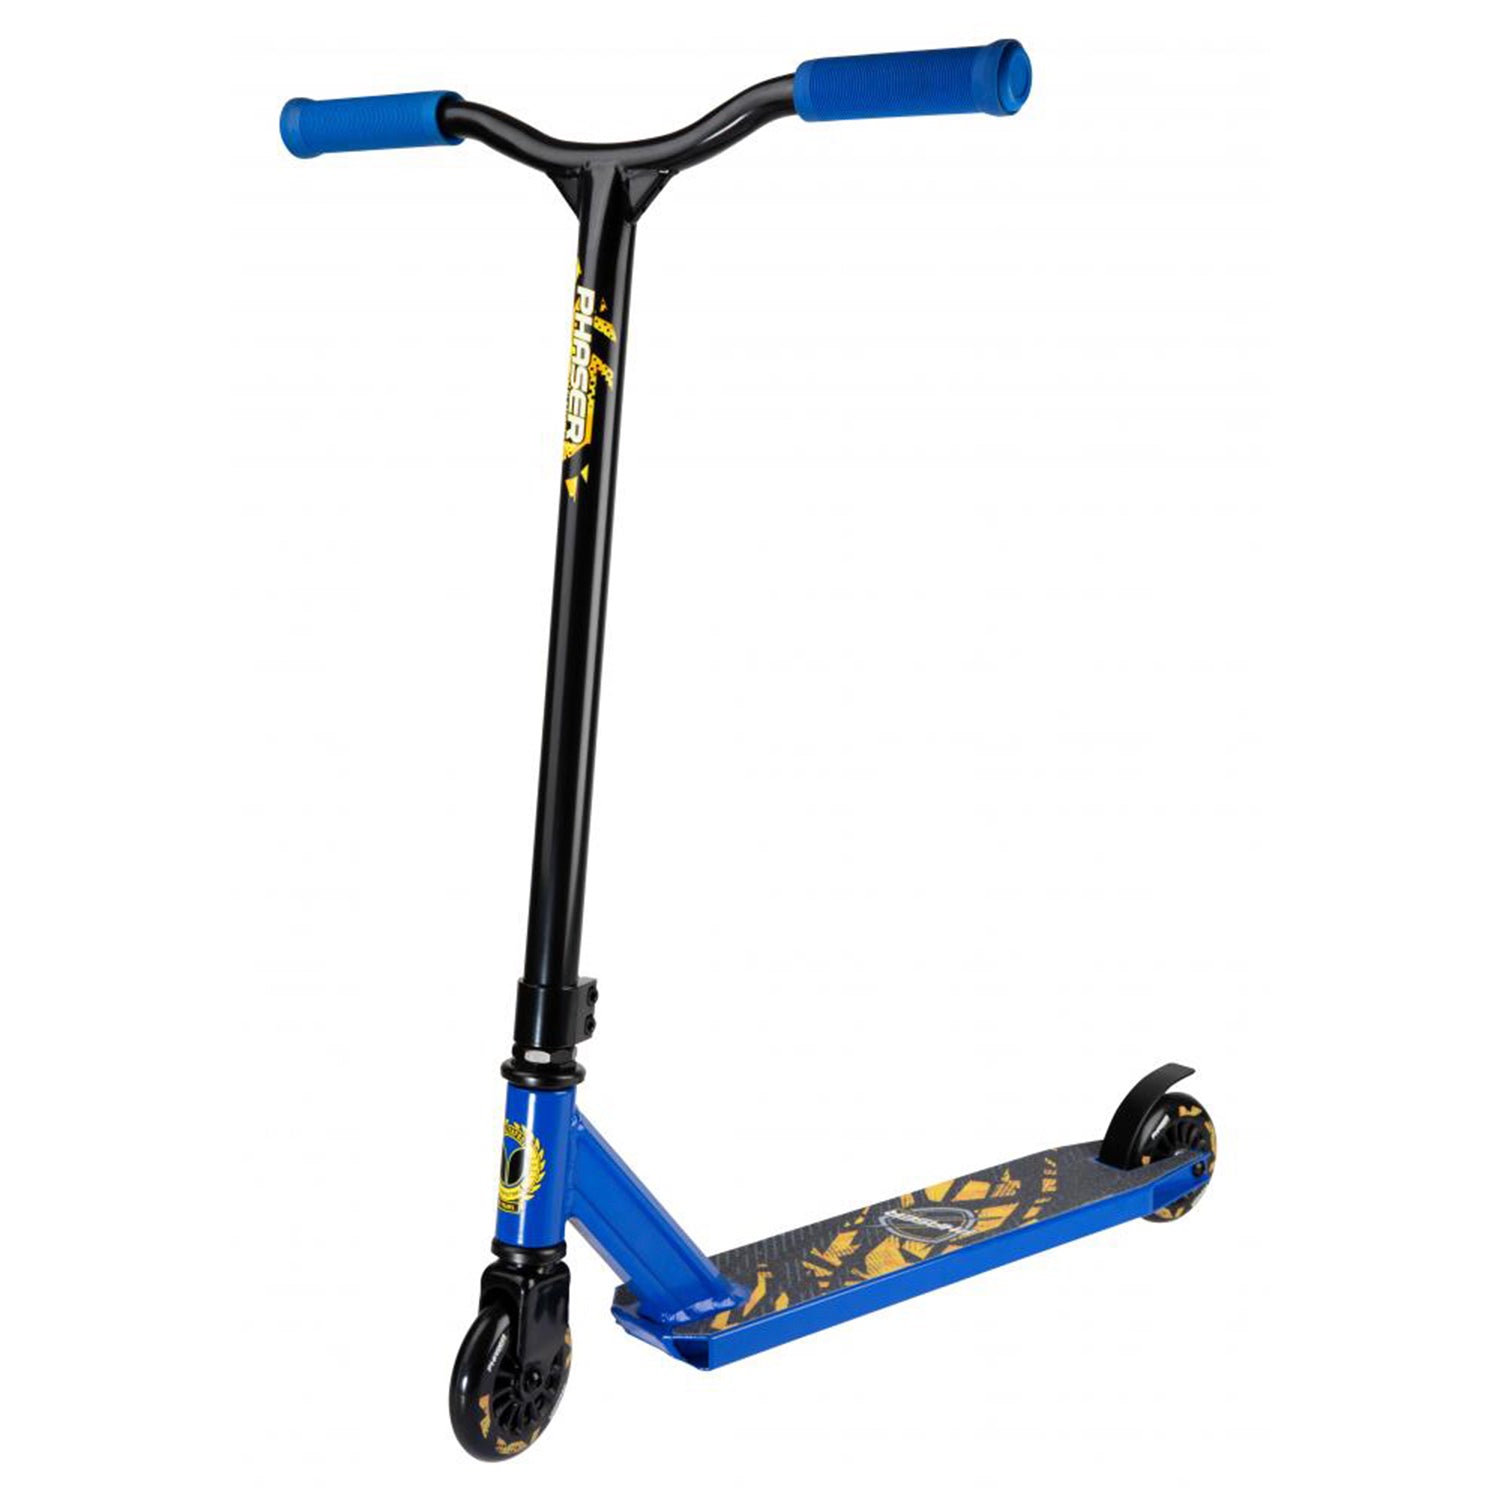 Blazer Pro Phaser 2 500mm Complete Scooter - Blue - Prime Delux Store